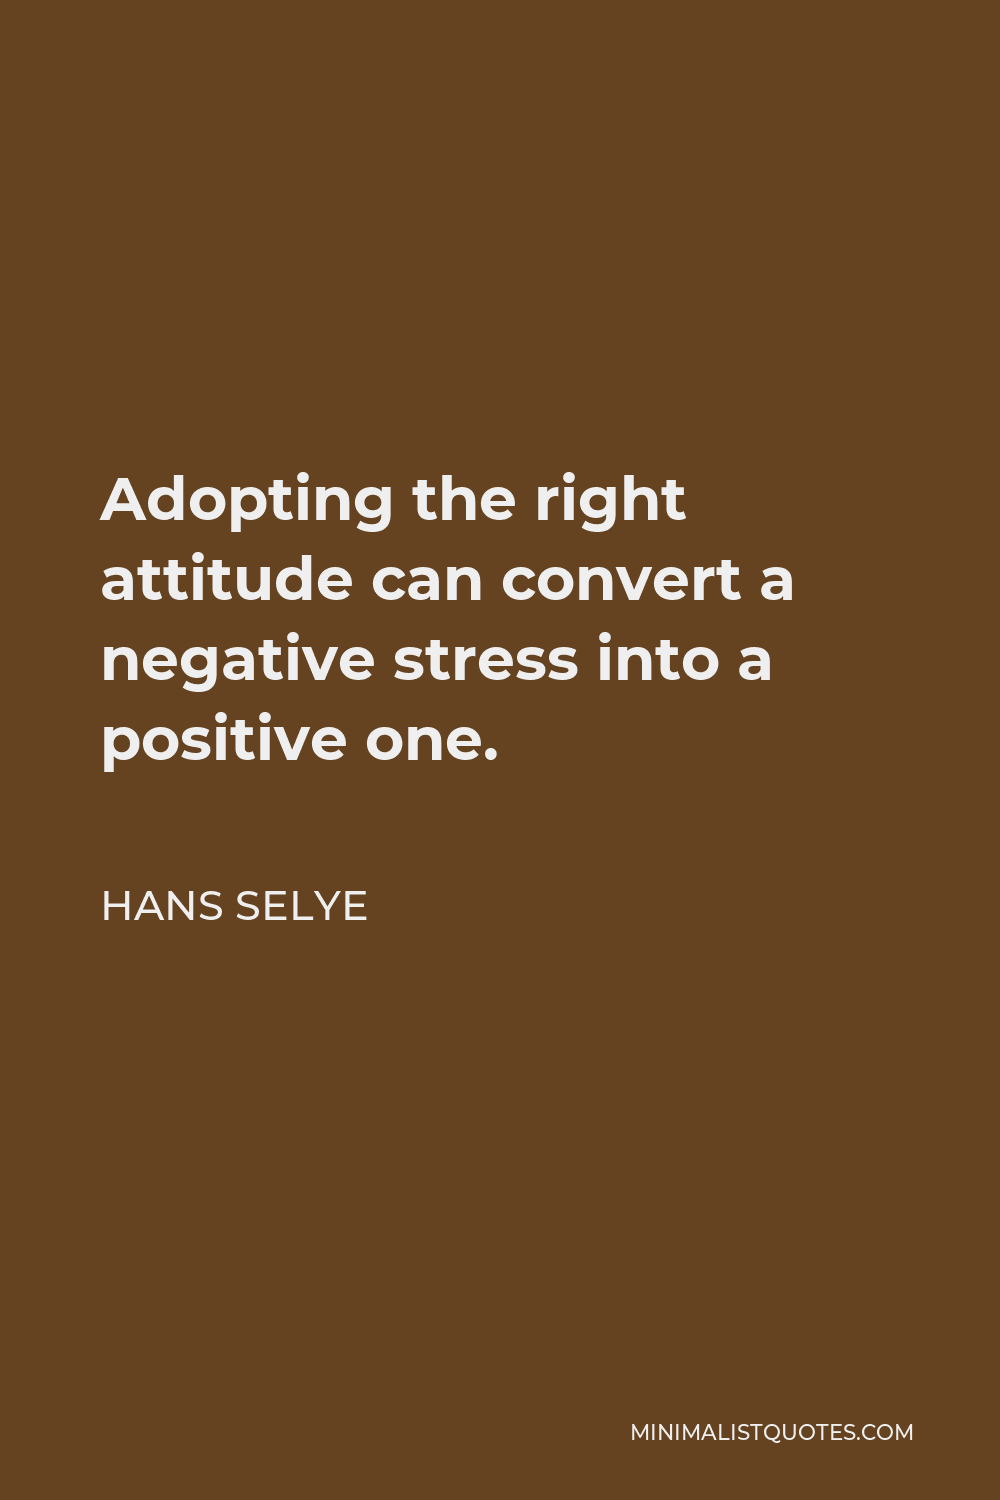 Hans Selye Quote - Adopting the right attitude can convert a negative stress into a positive one.